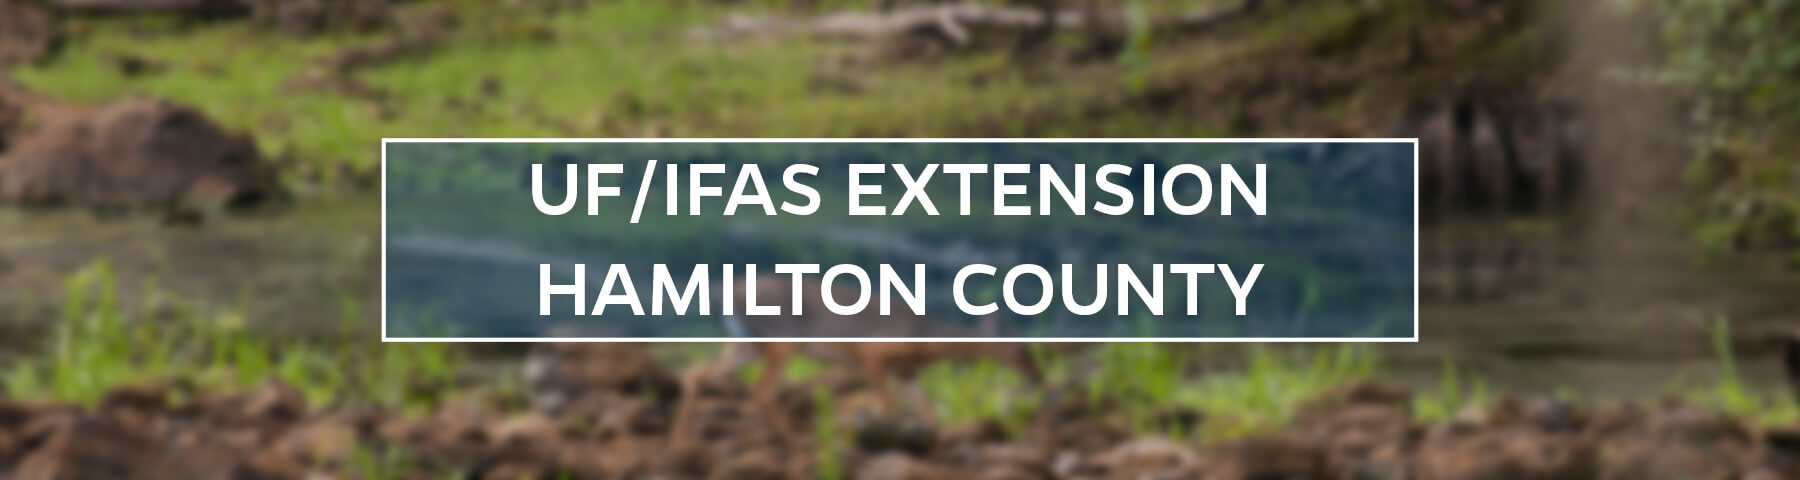 UF/IFAS Extension Hamilton County